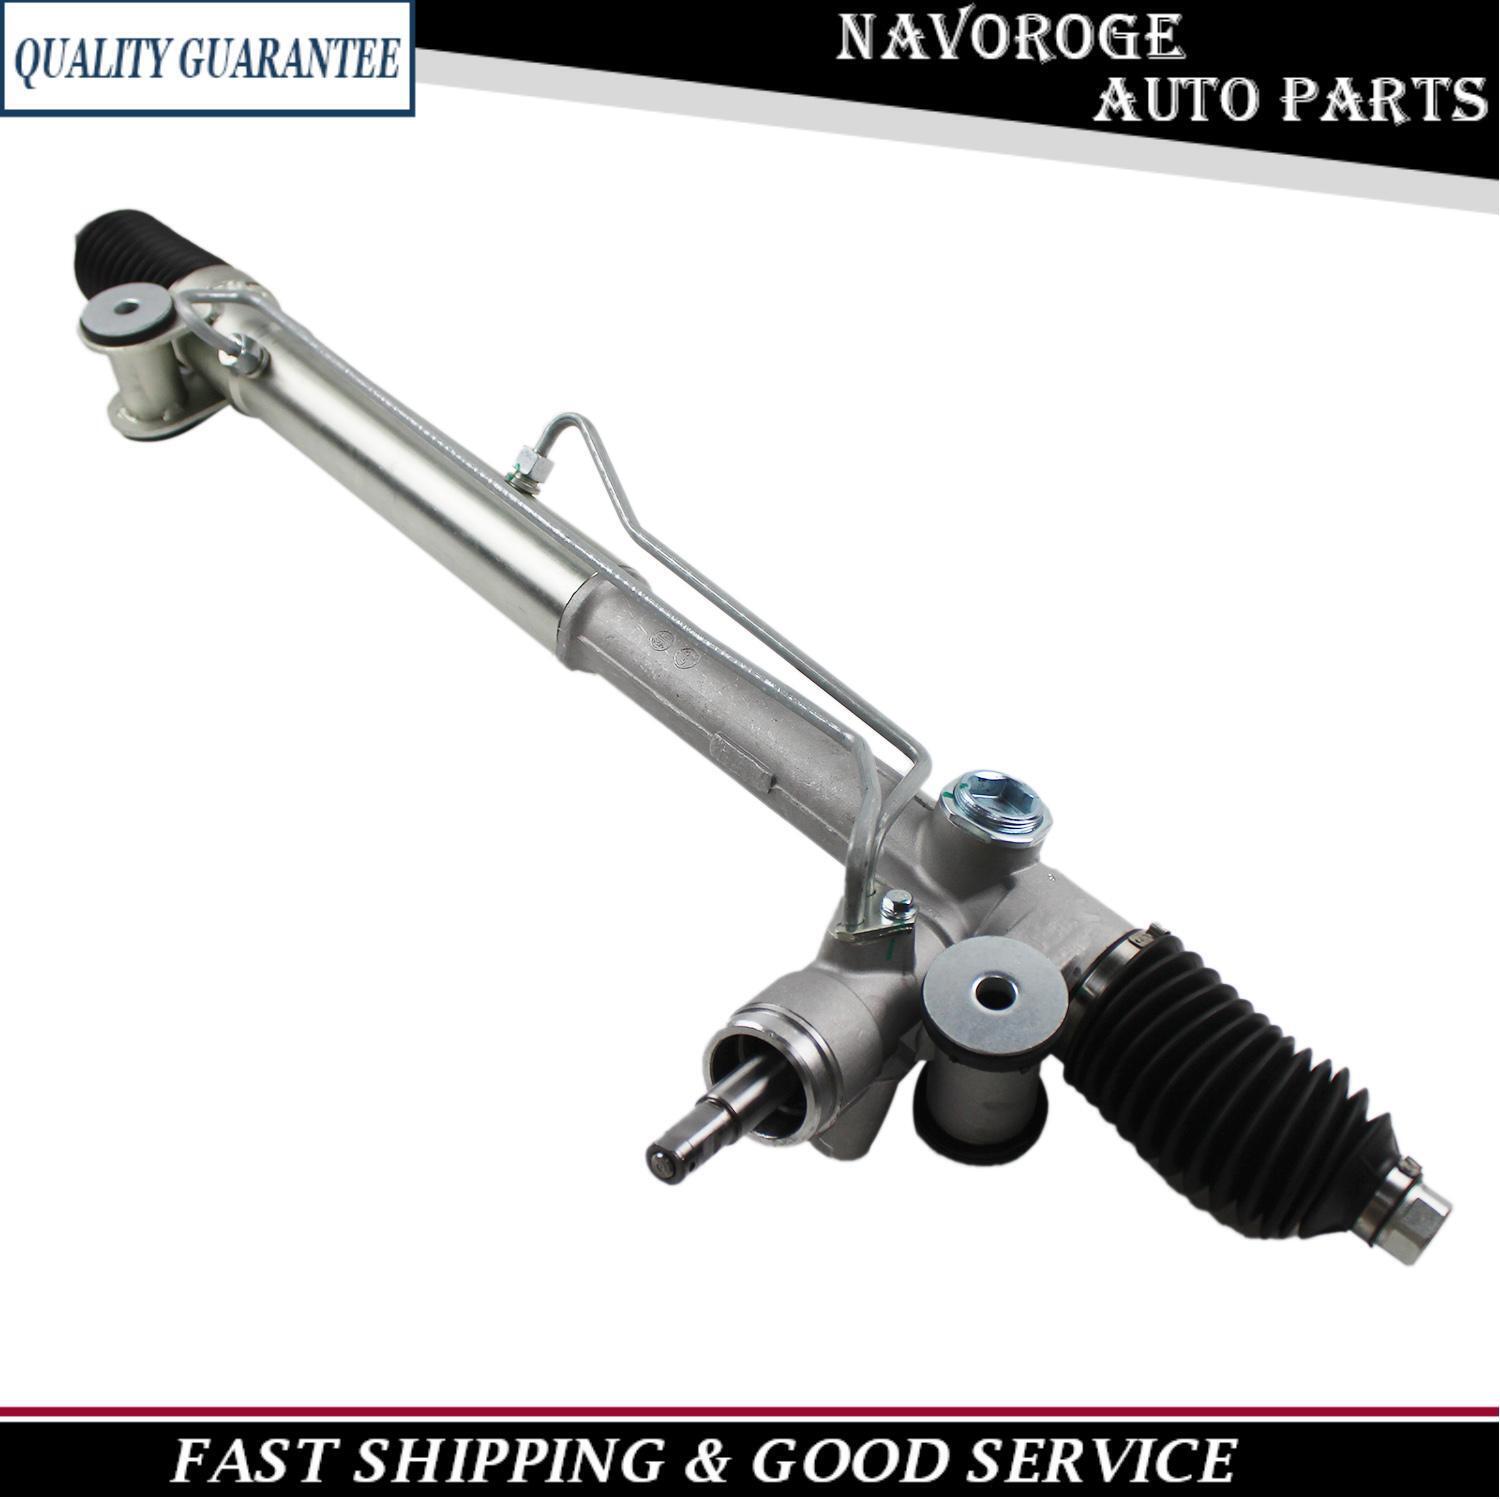 Power Steering Rack & Pinion Assembly For 02-09 Chevy Trailblazer Envoy 22-1014